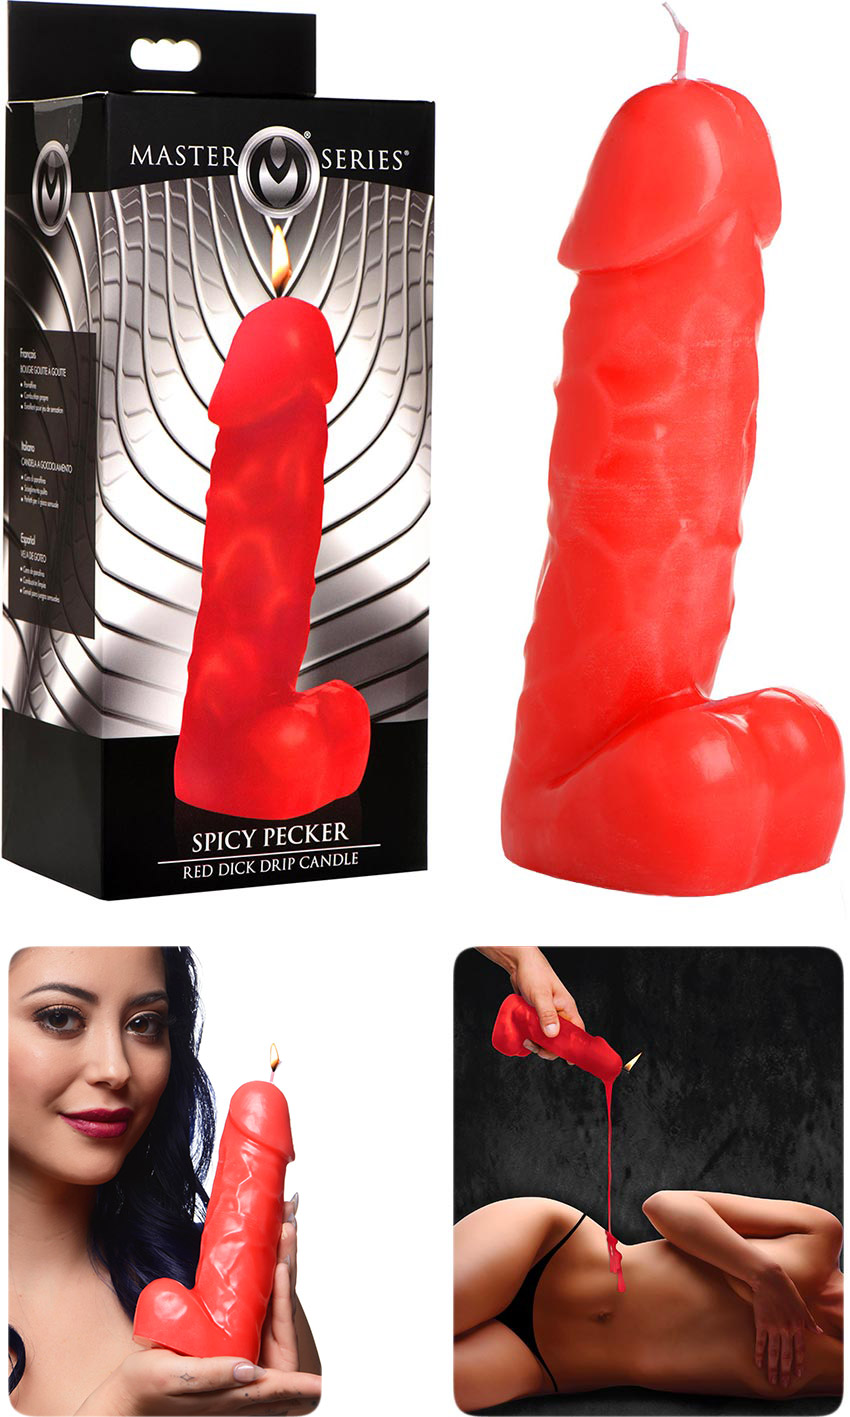 Master Series Spicy Pecker candle in the shape of a penis for BDSM games